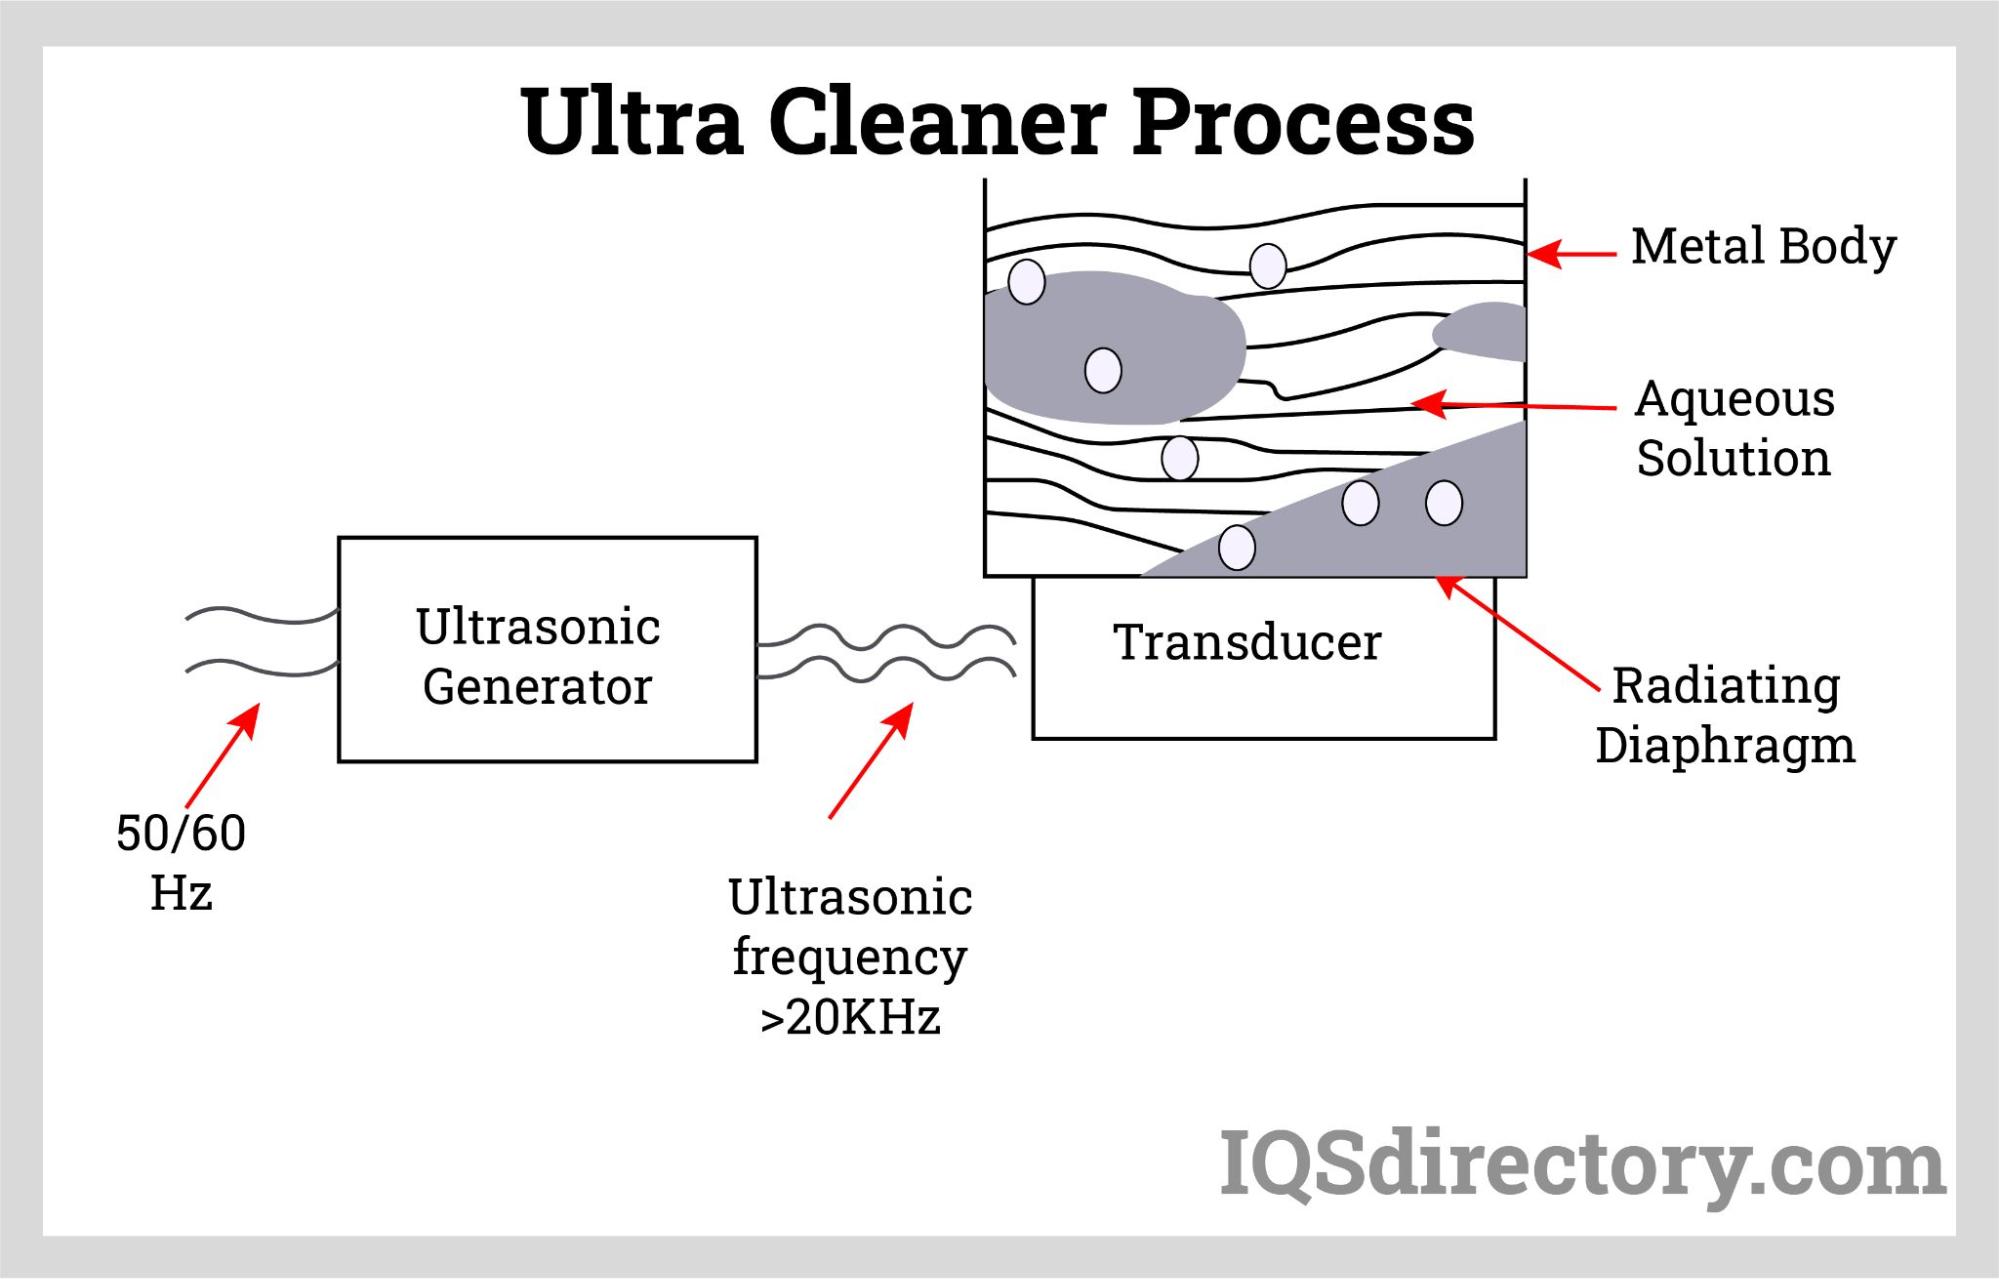 Ultra Cleaner Process